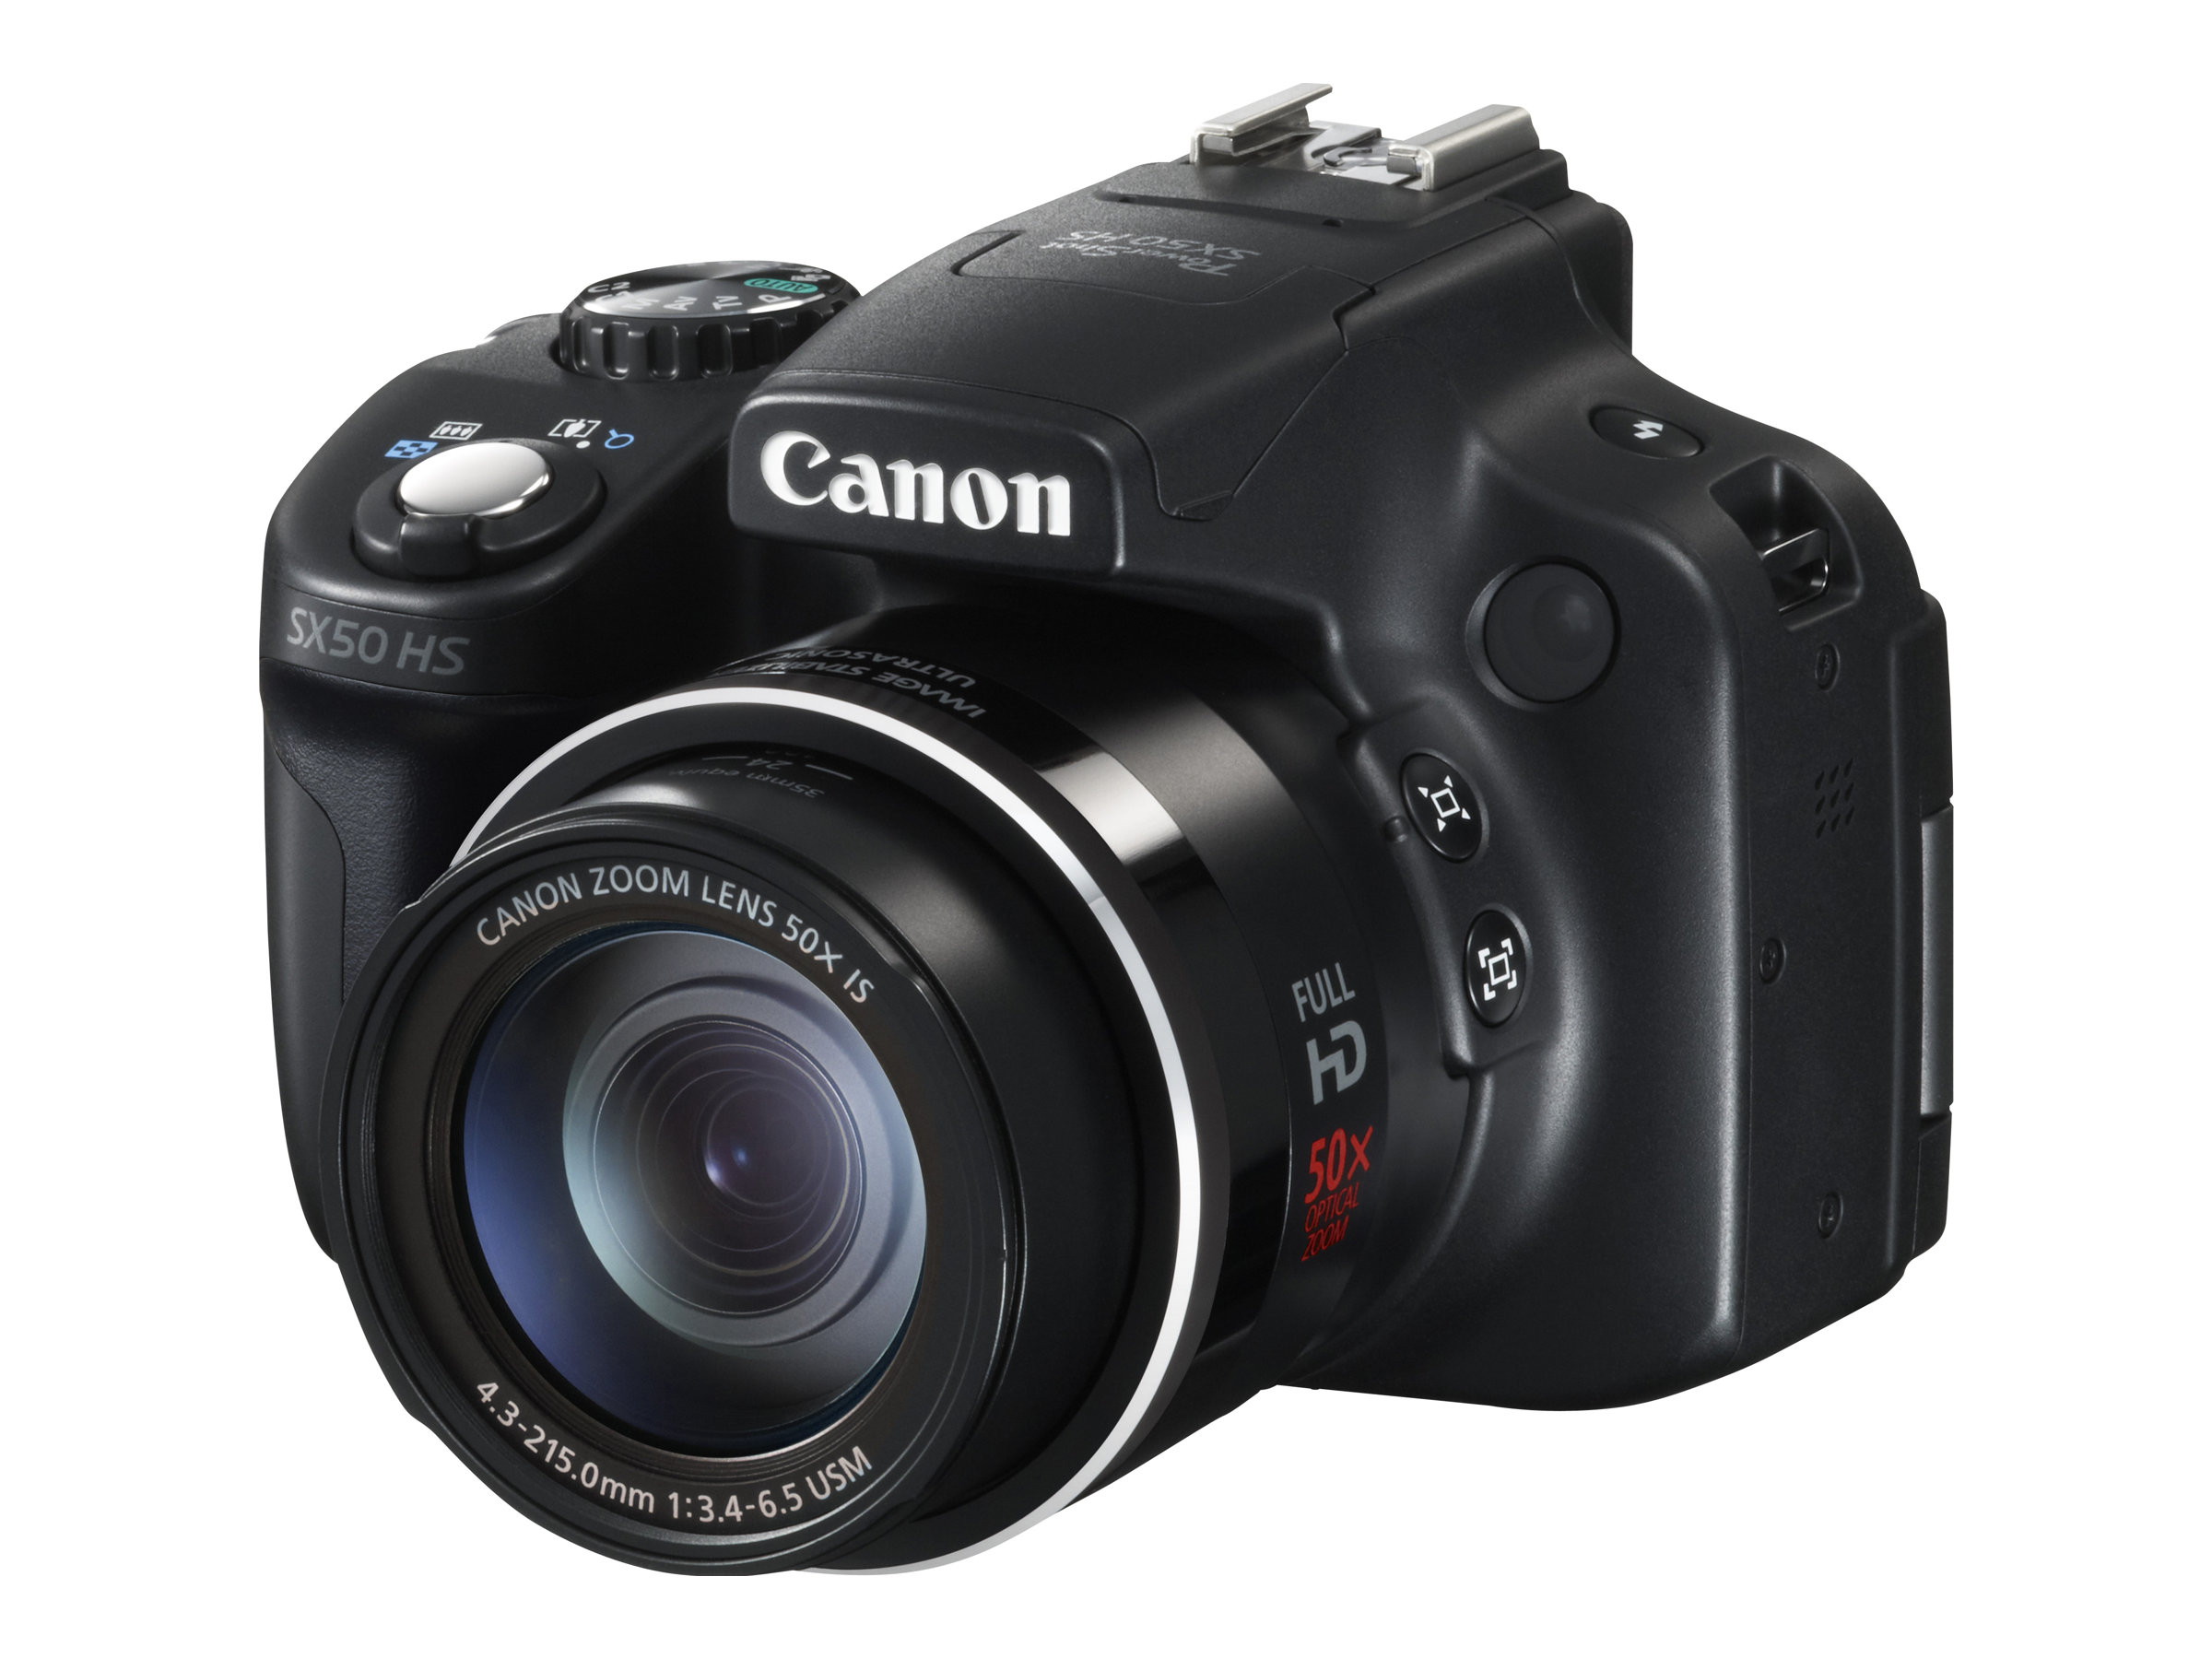 Canon PowerShot SX50 HS - Digital camera - compact - 12.1 MP - 1080p - 50x optical zoom - image 1 of 15